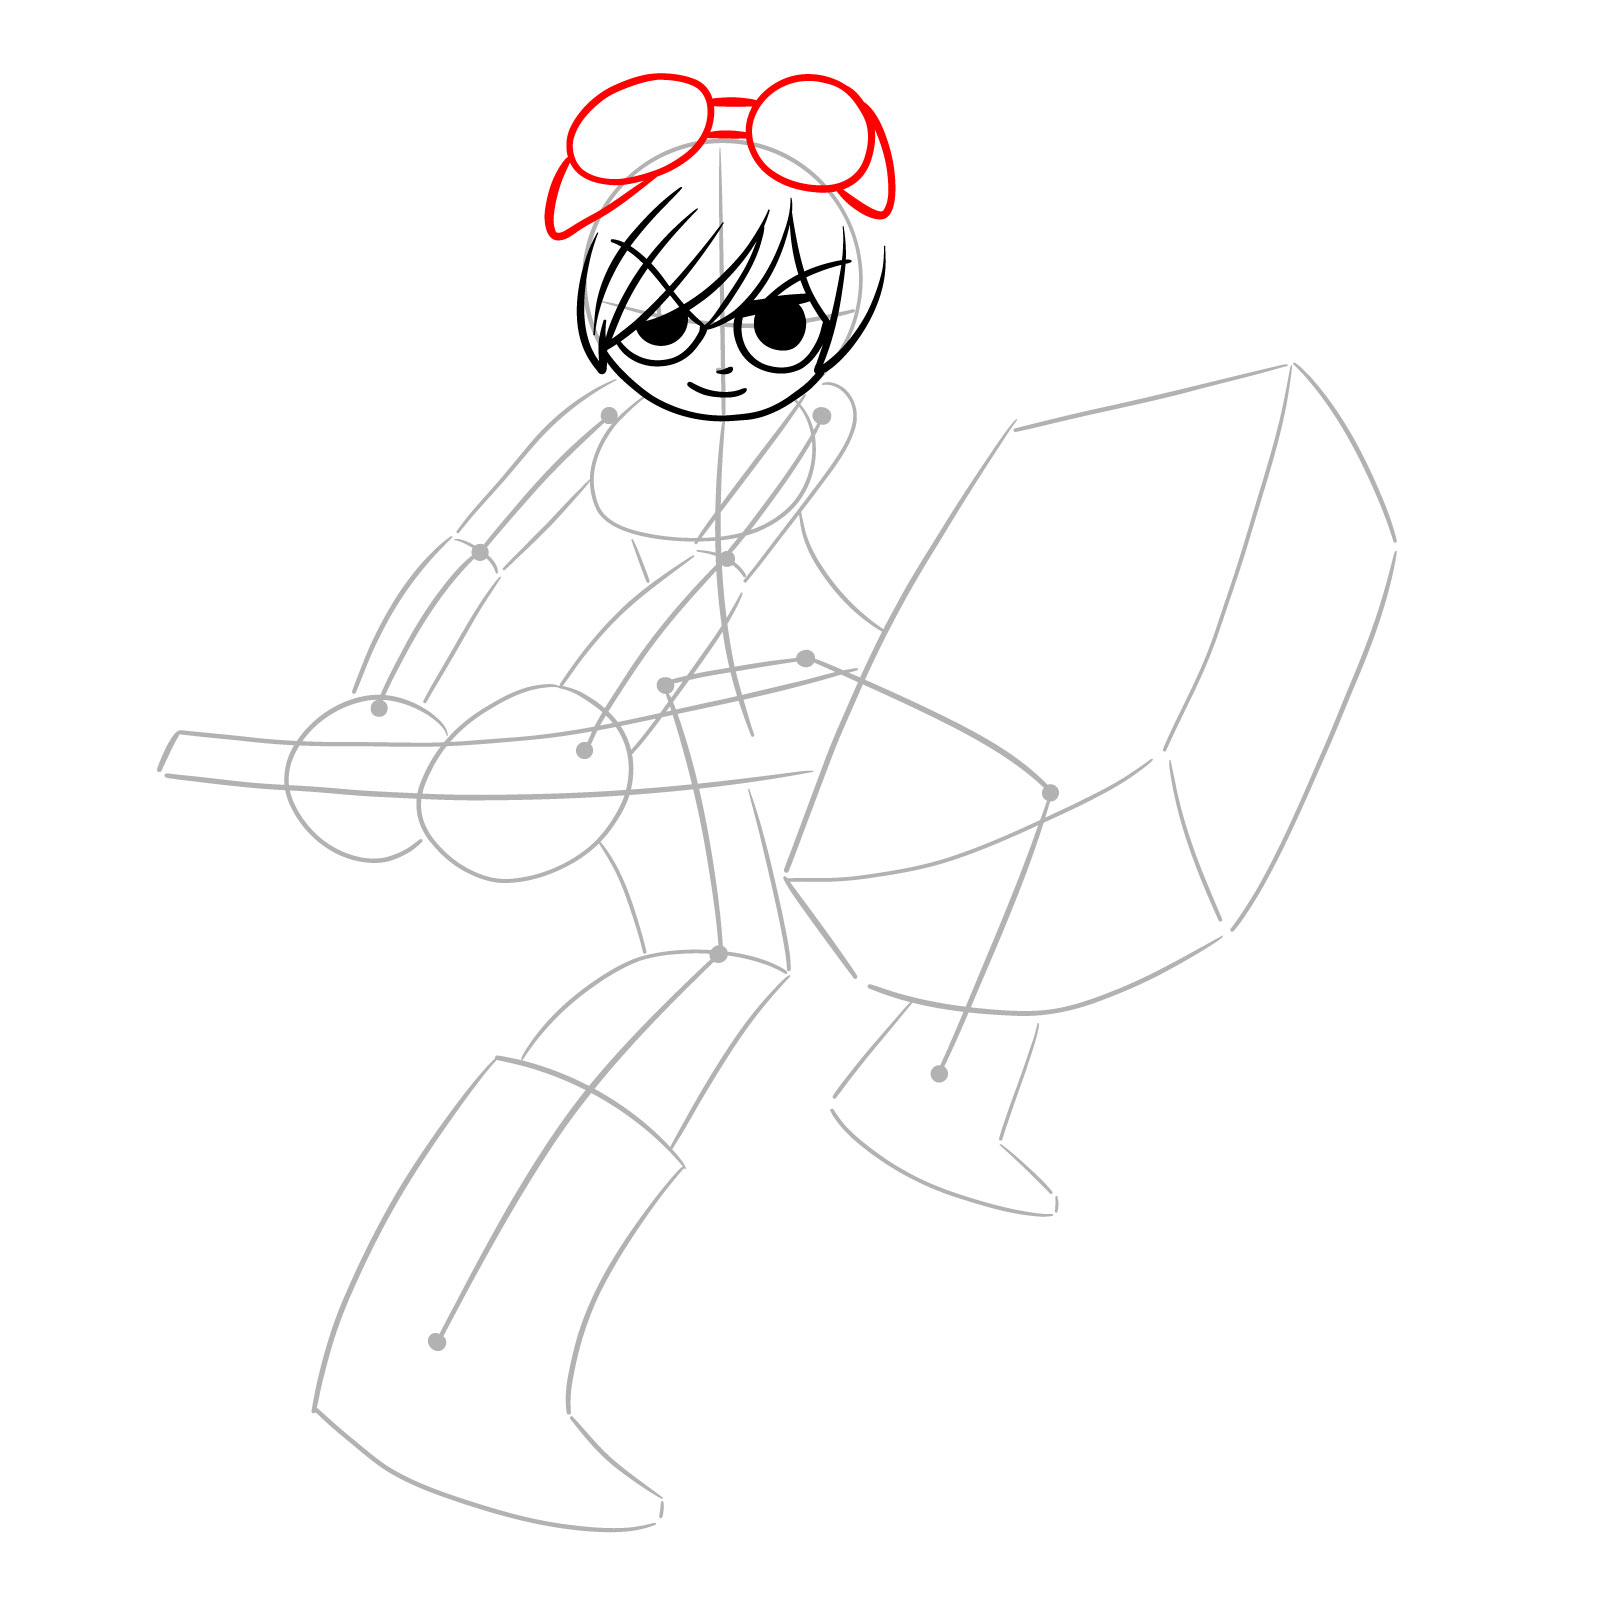 Ramona Flowers with her Large Hammer drawing - easy step-by-step guide - step 08